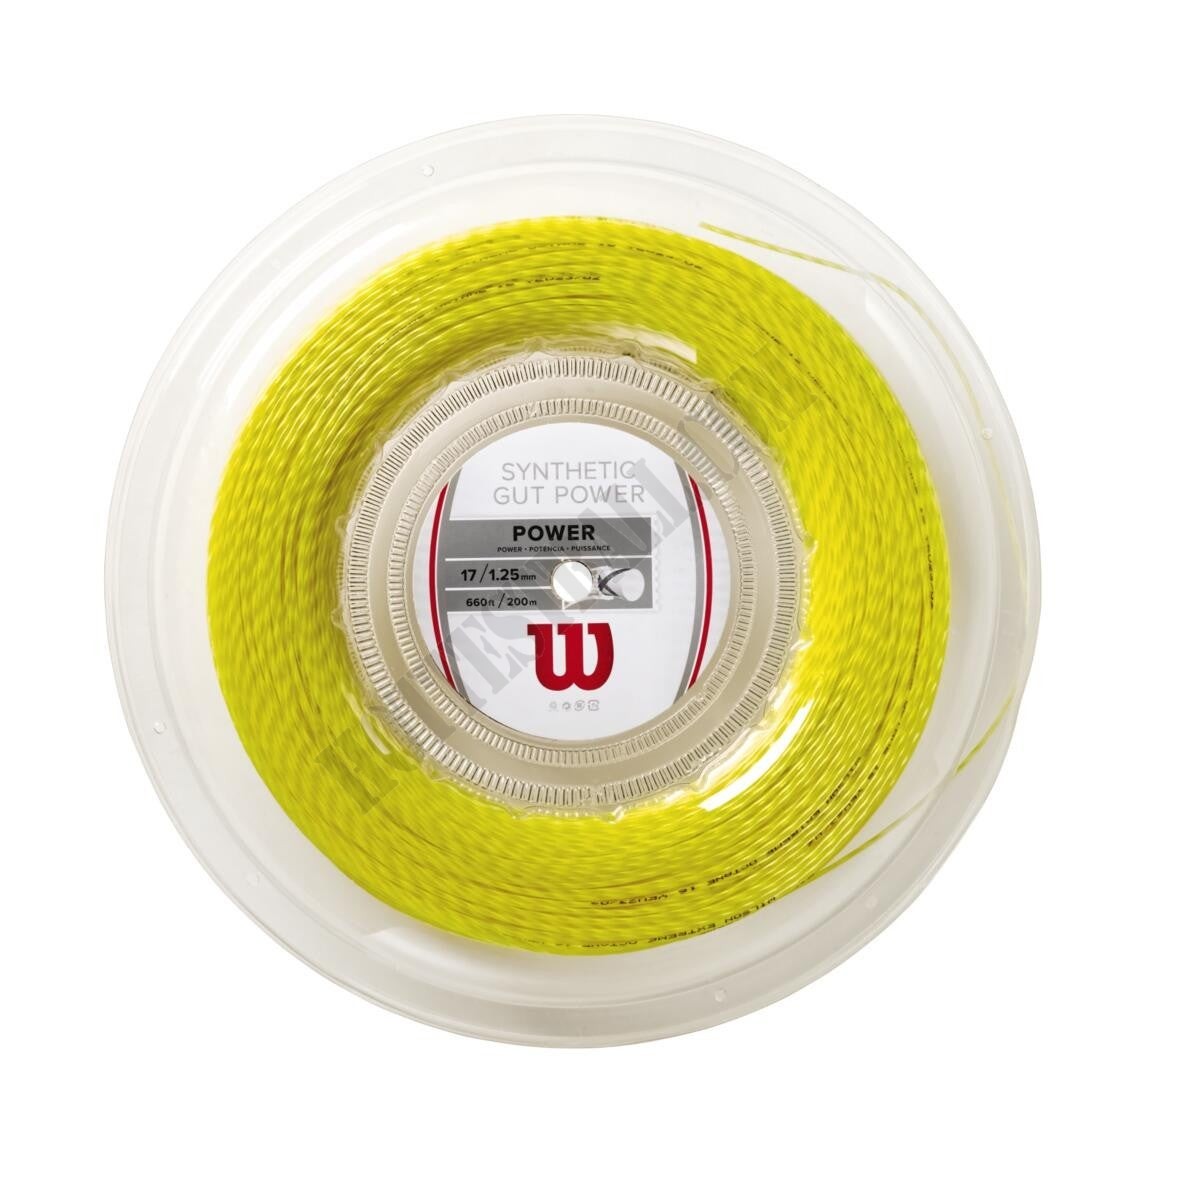 Synthetic Gut Power Tennis String - Reel - Wilson Discount Store - -2